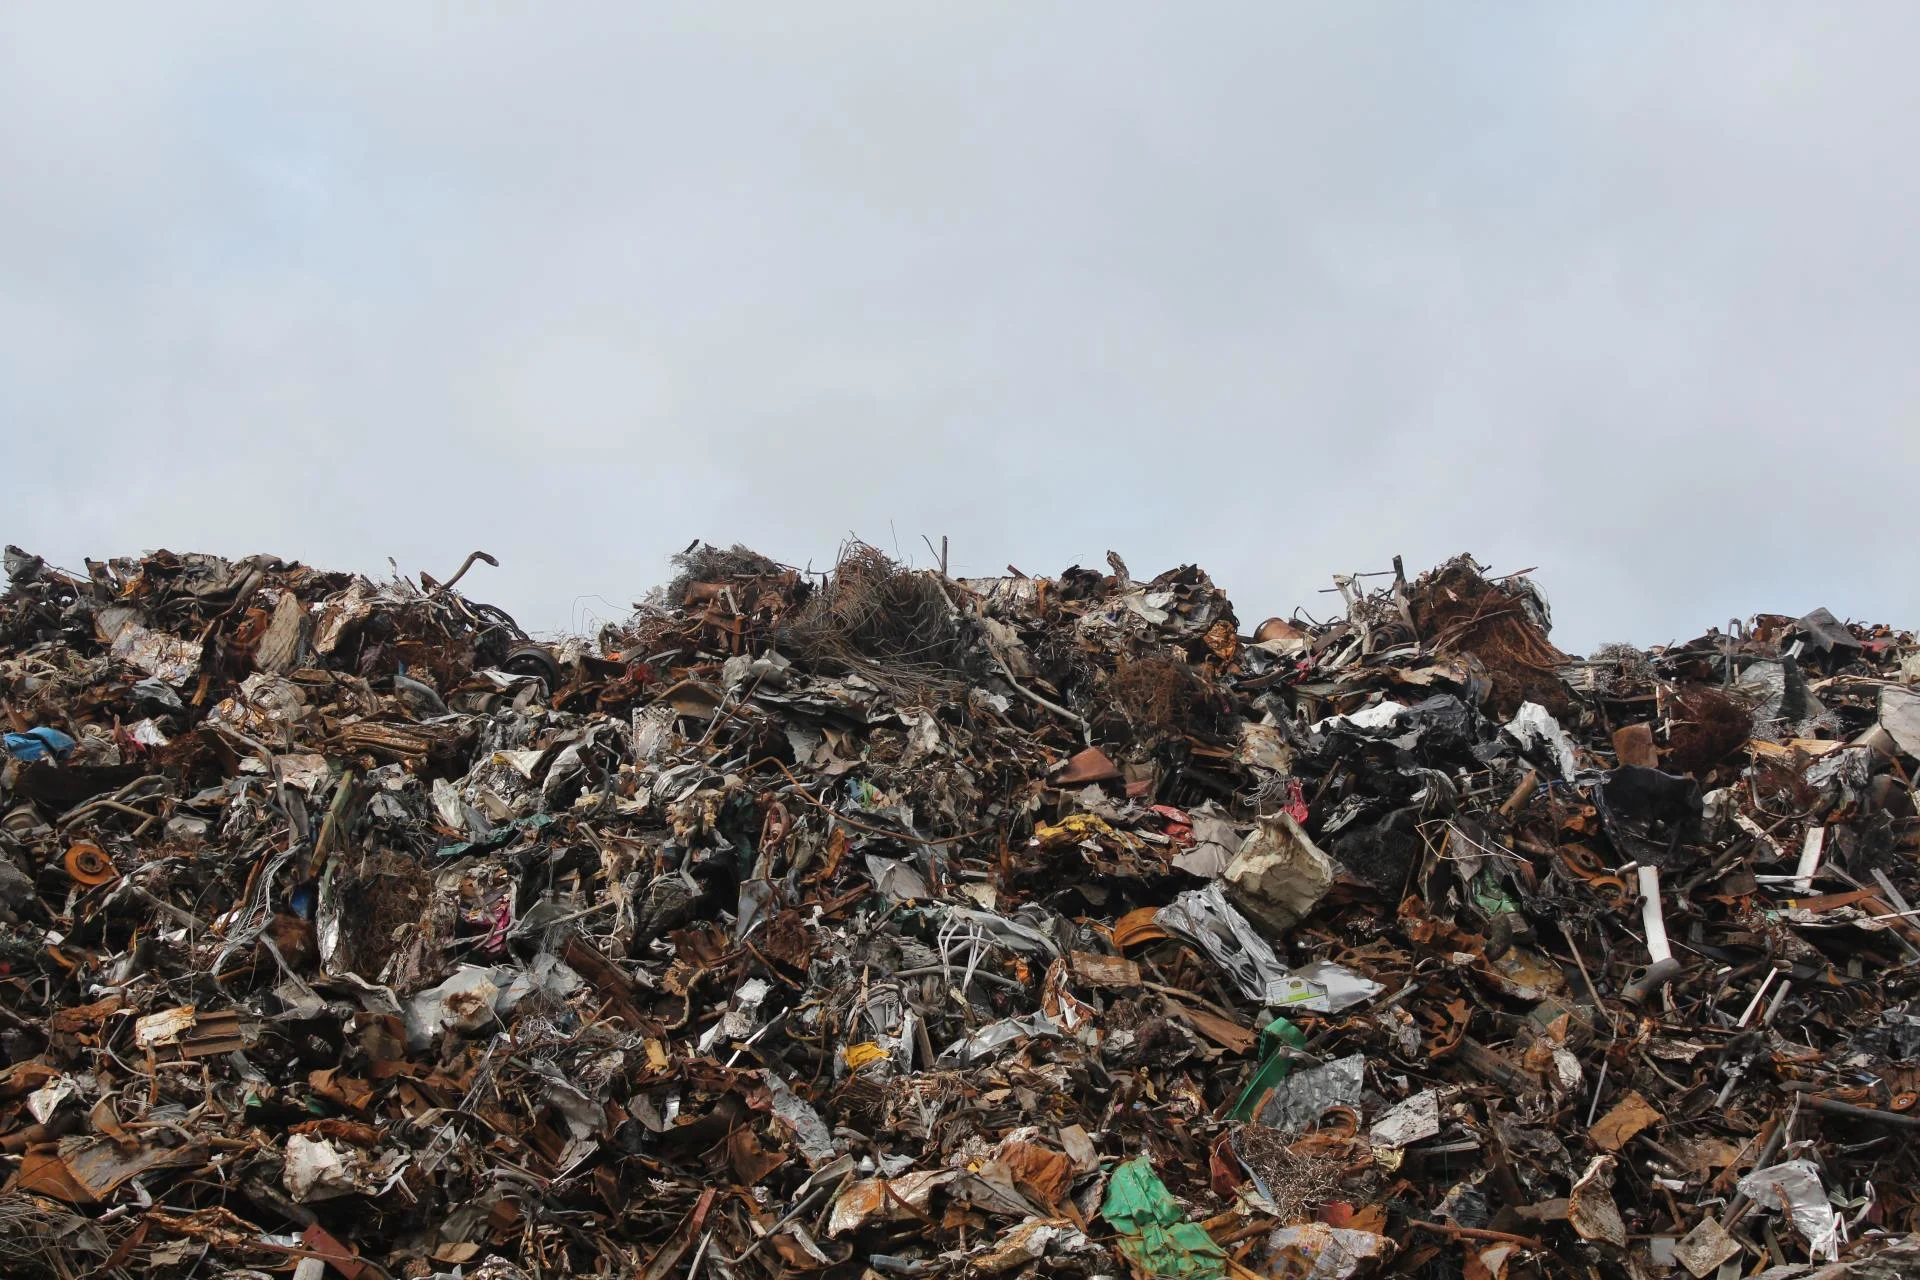 Researchers measuring city landfill emissions, climate impacts of waste